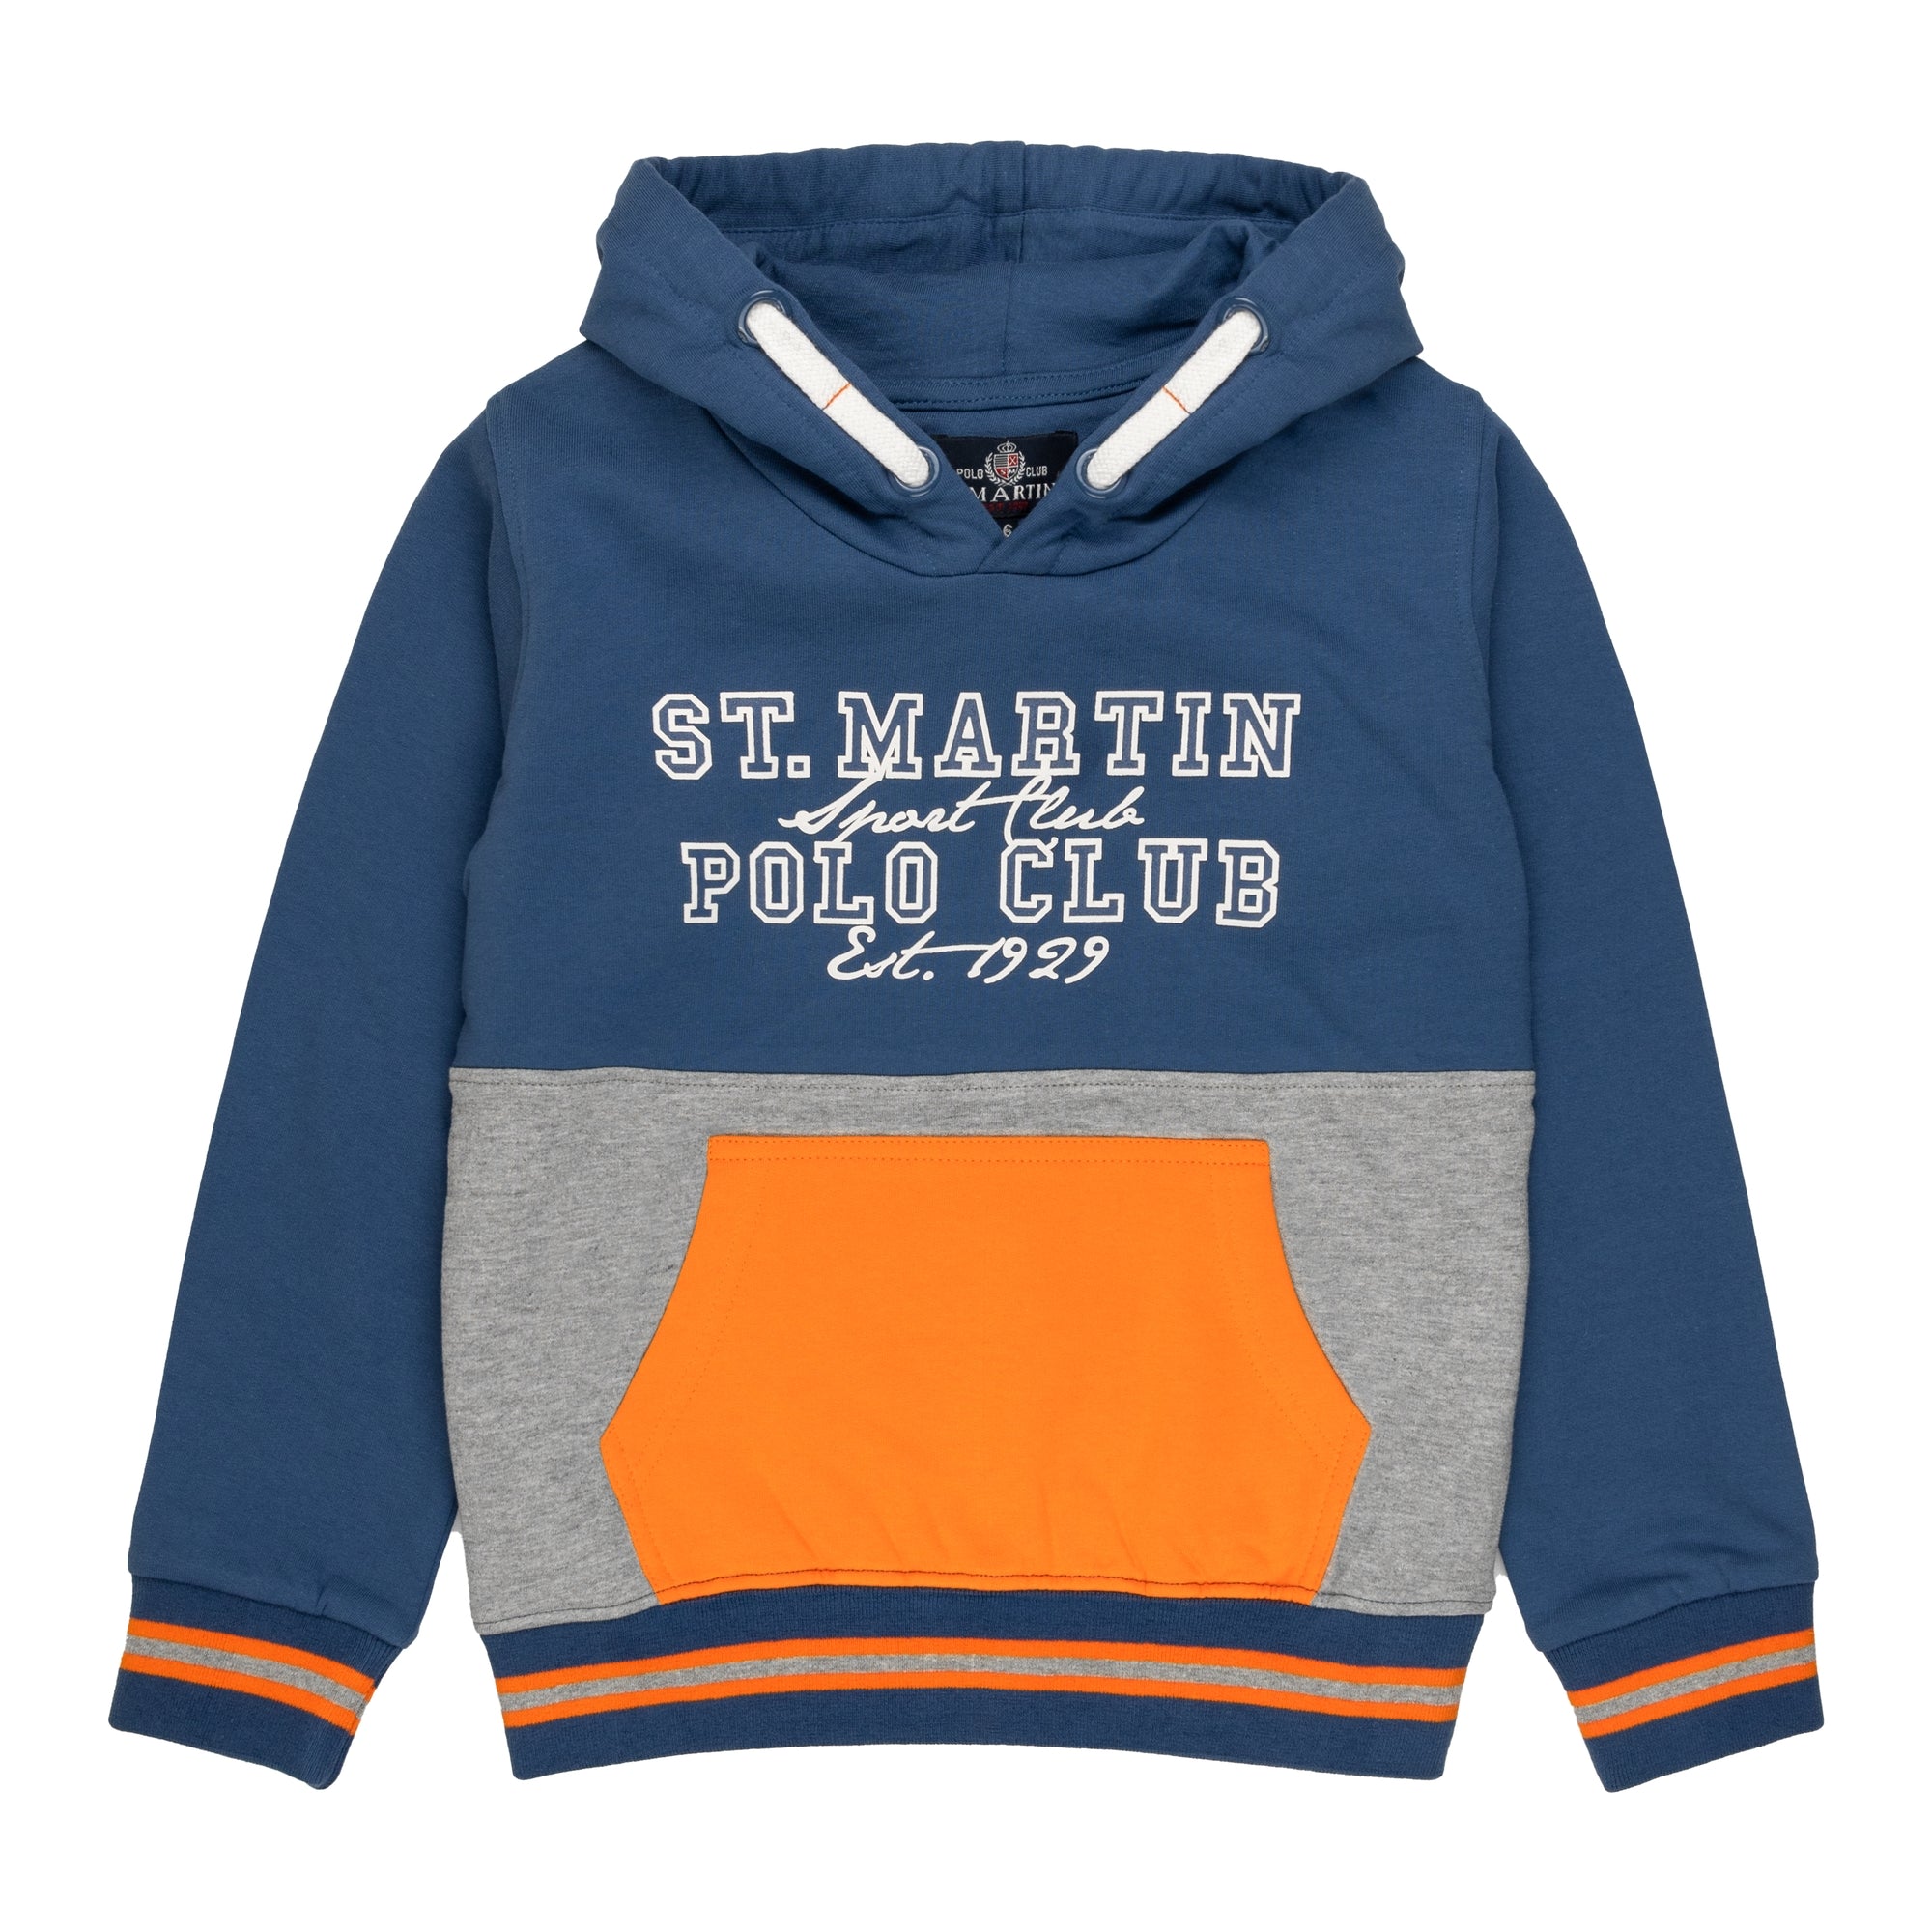 Two-tone hooded sweatshirt with inside brushed printed logo